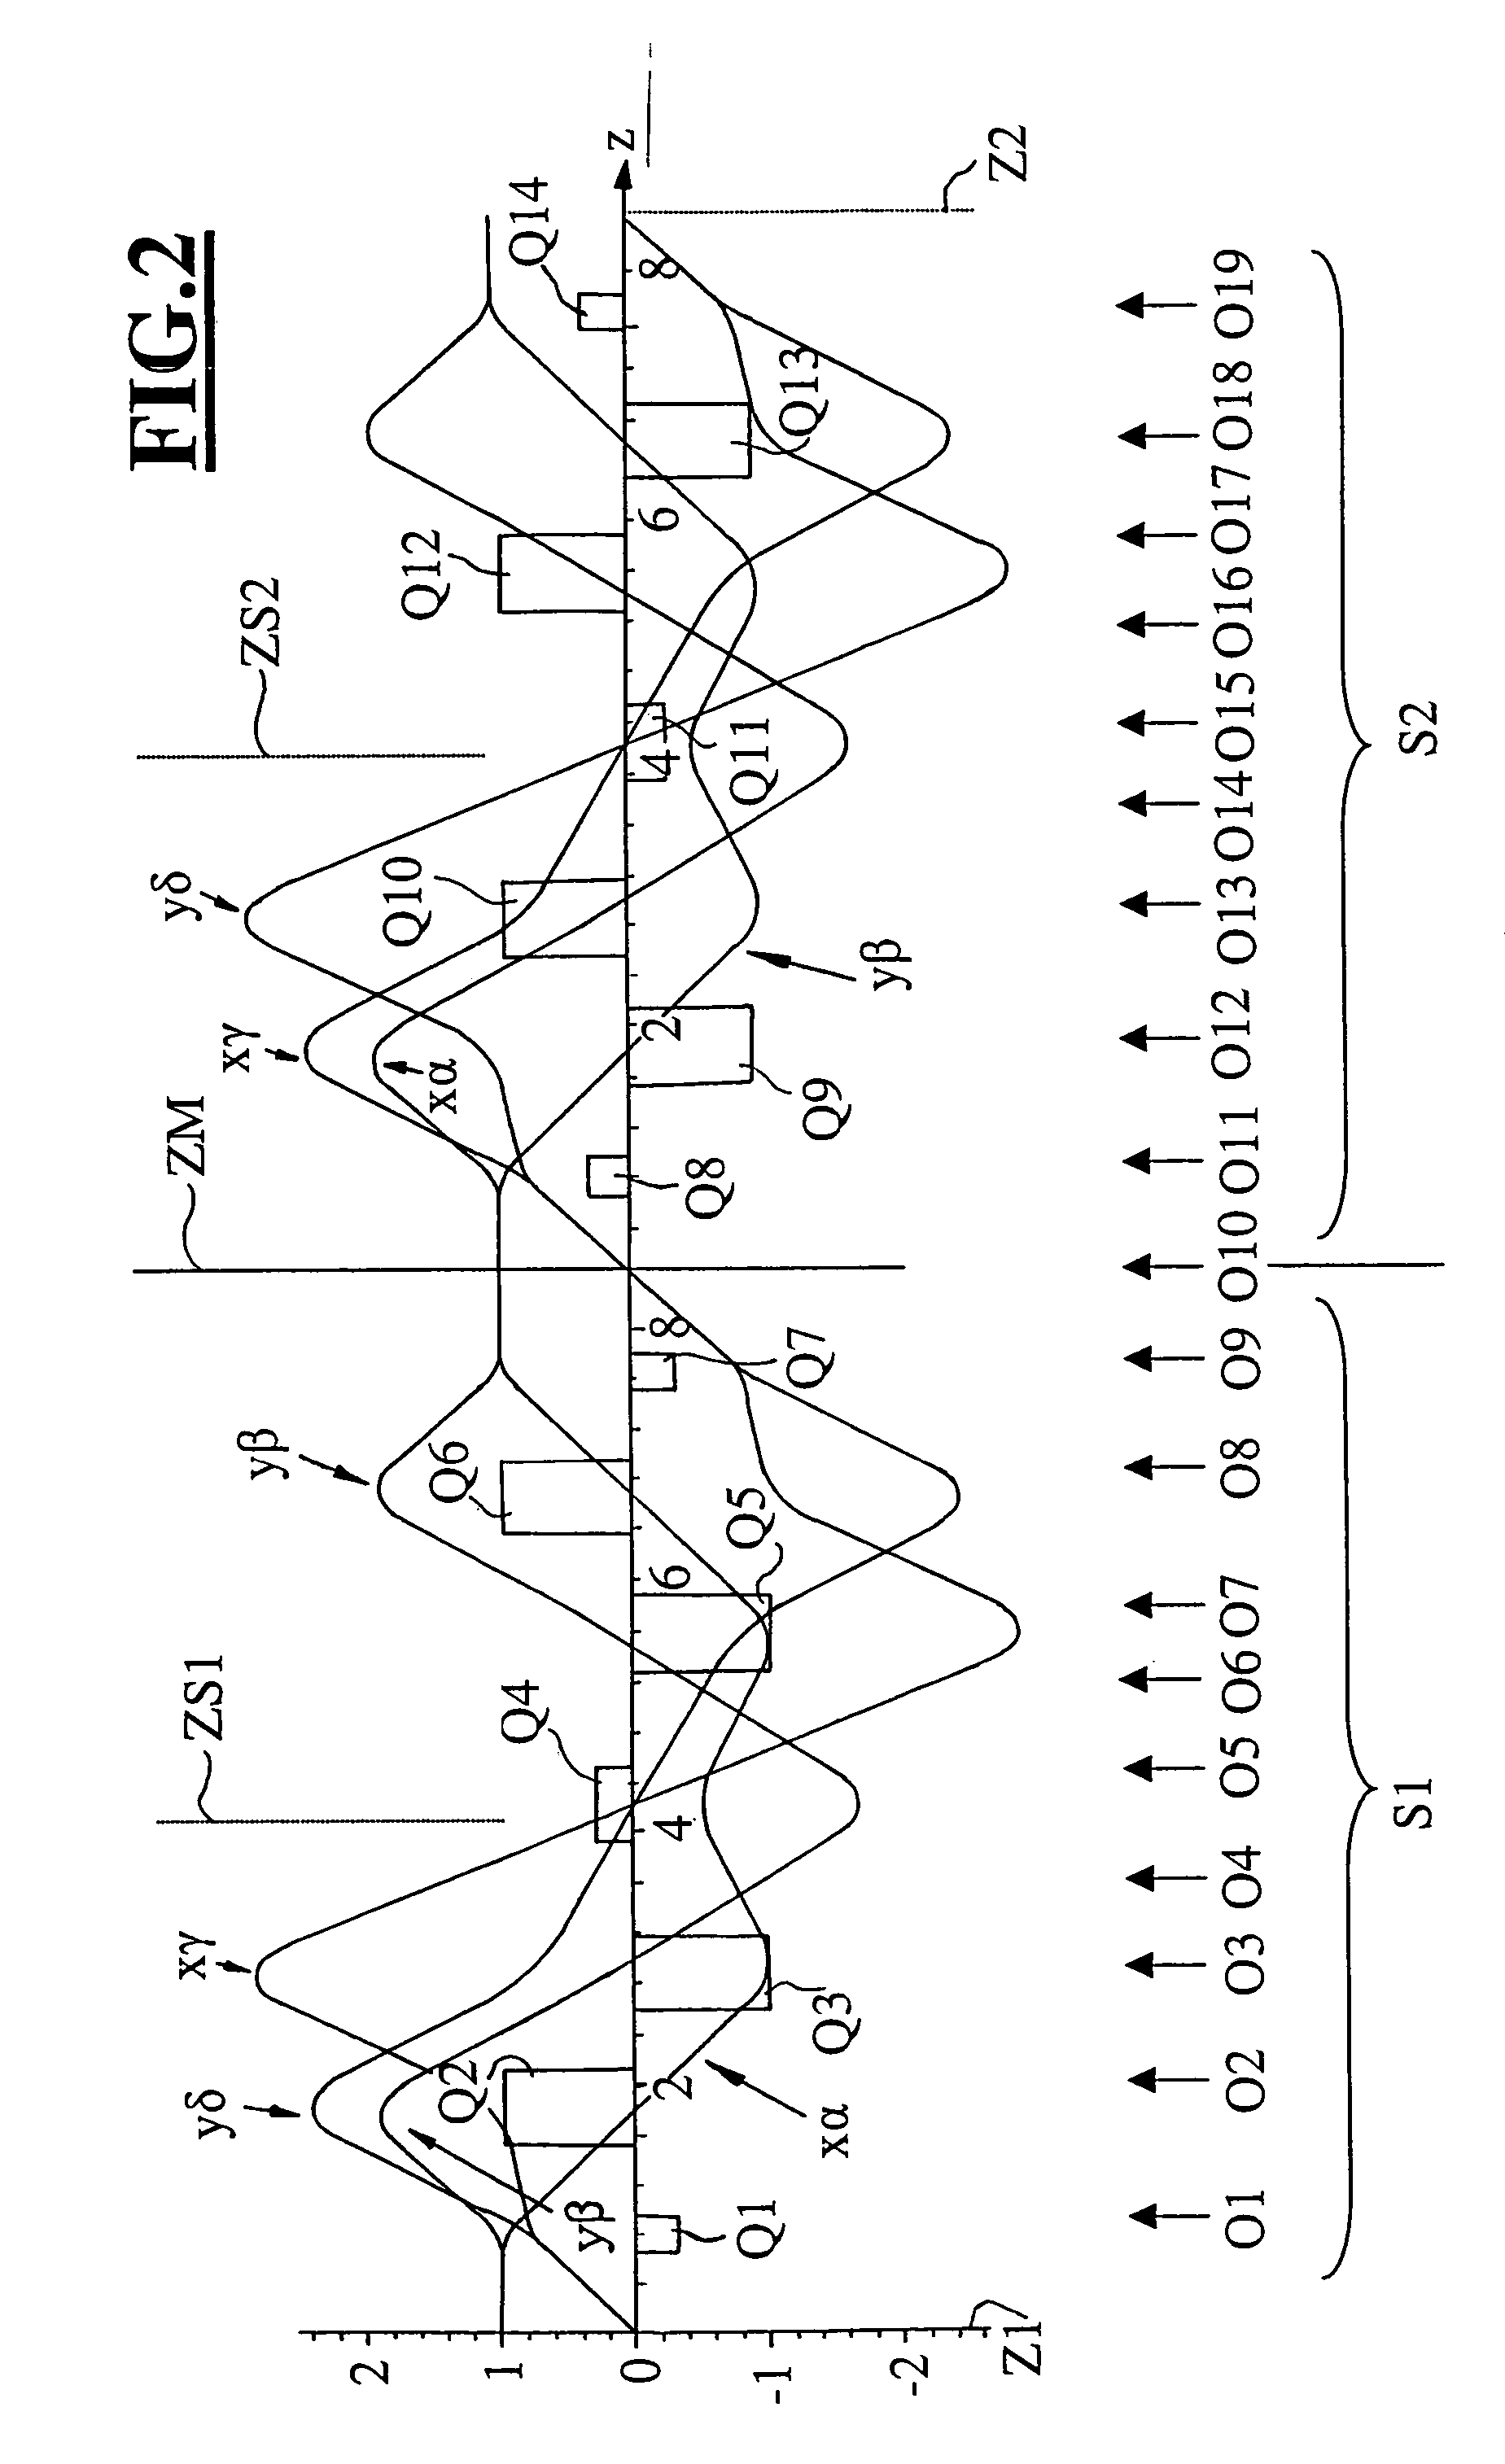 Corrector for correcting first-order chromatic aberrations of the first degree